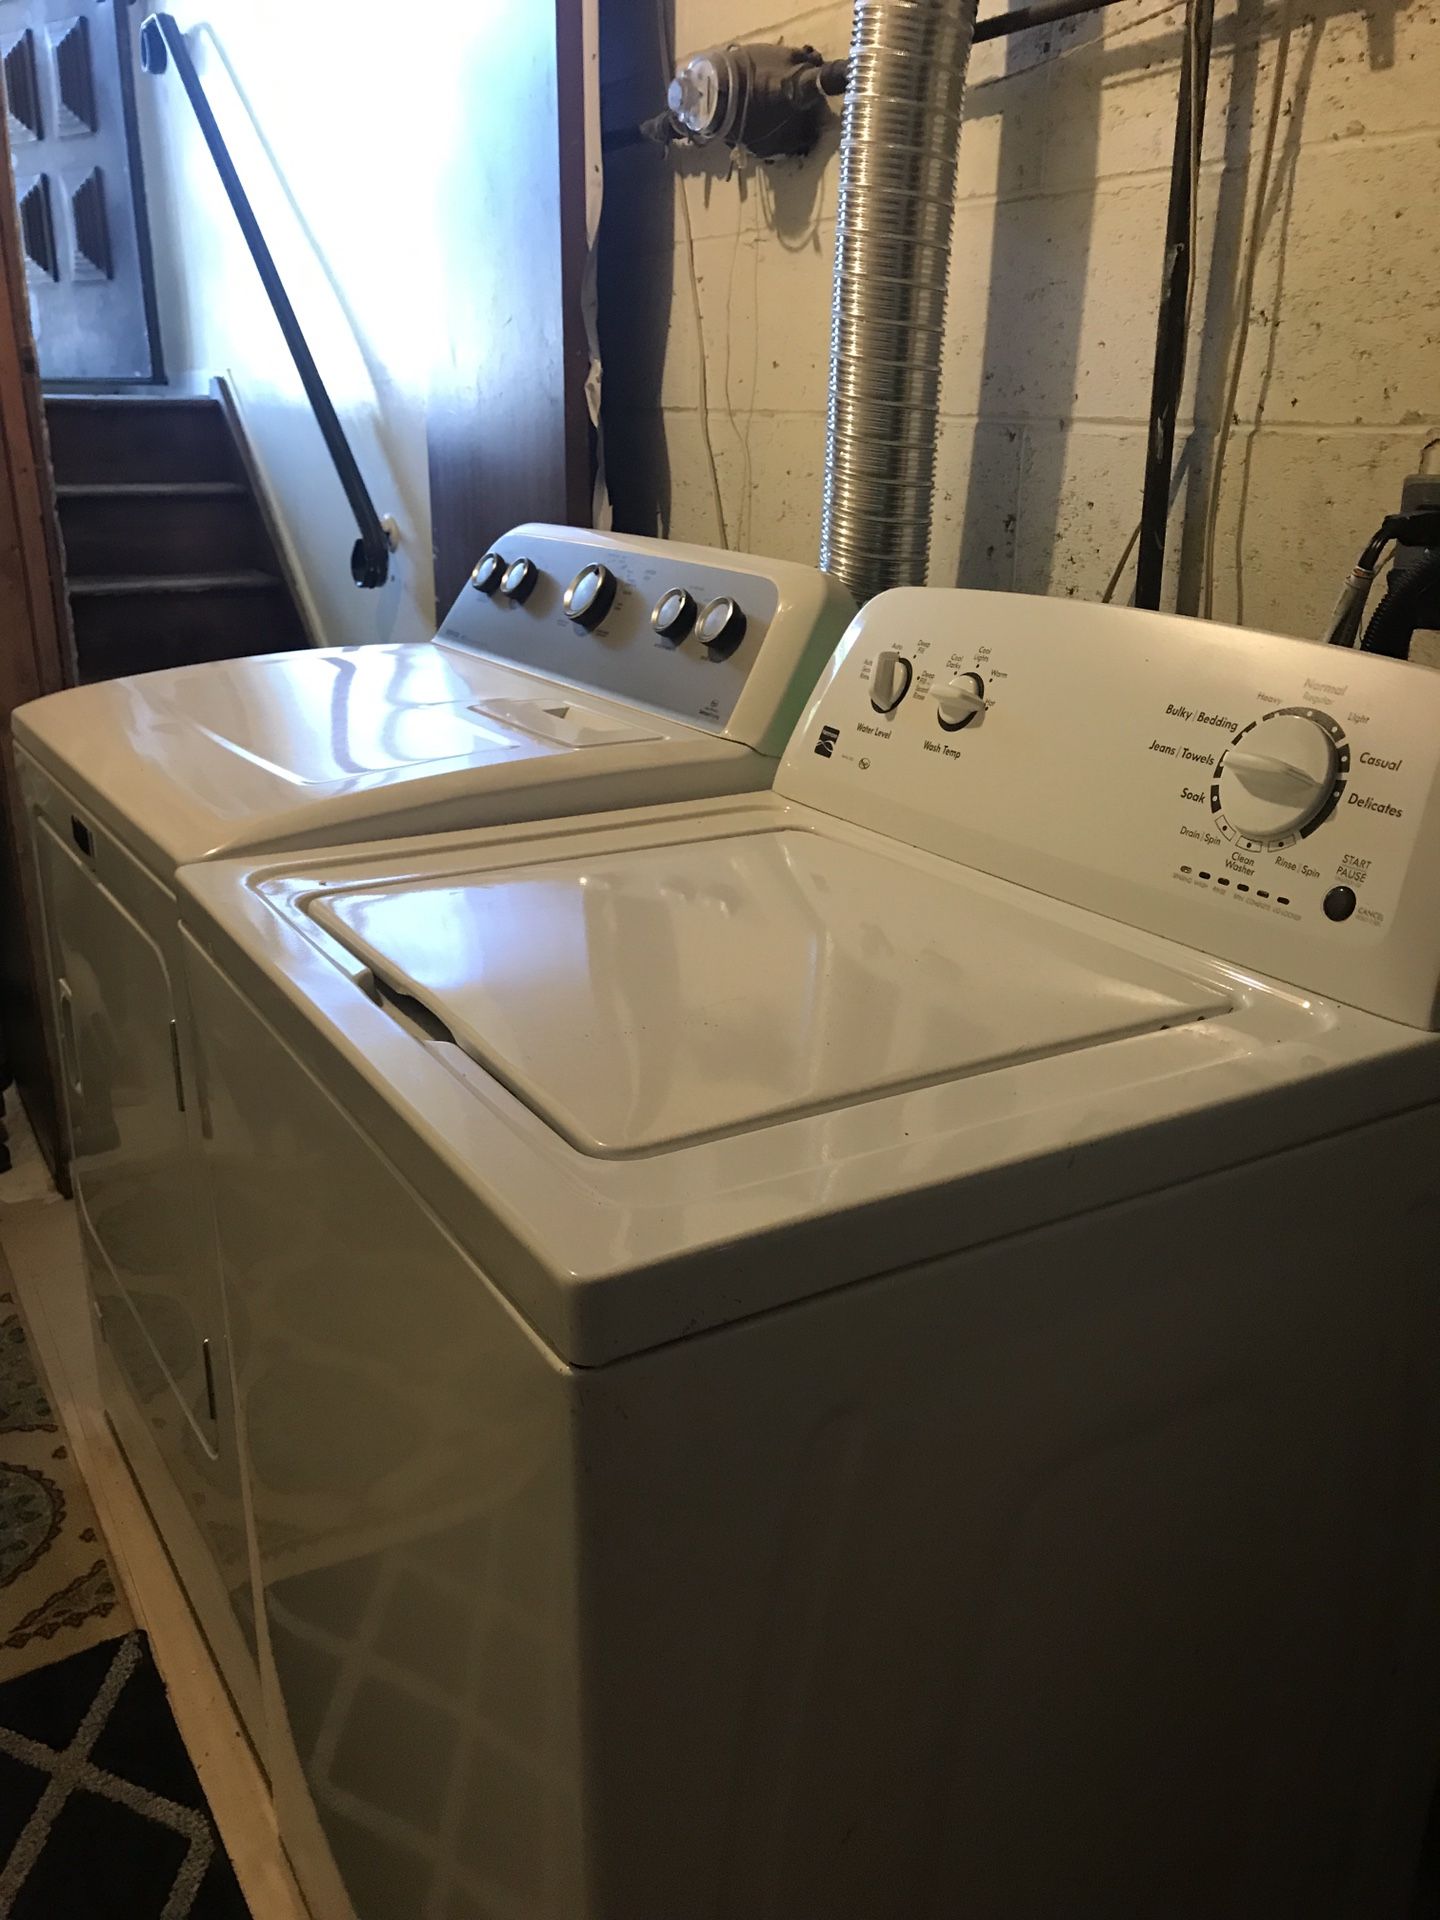 Washer and dryer (kenmore washer and dryer is bravo)